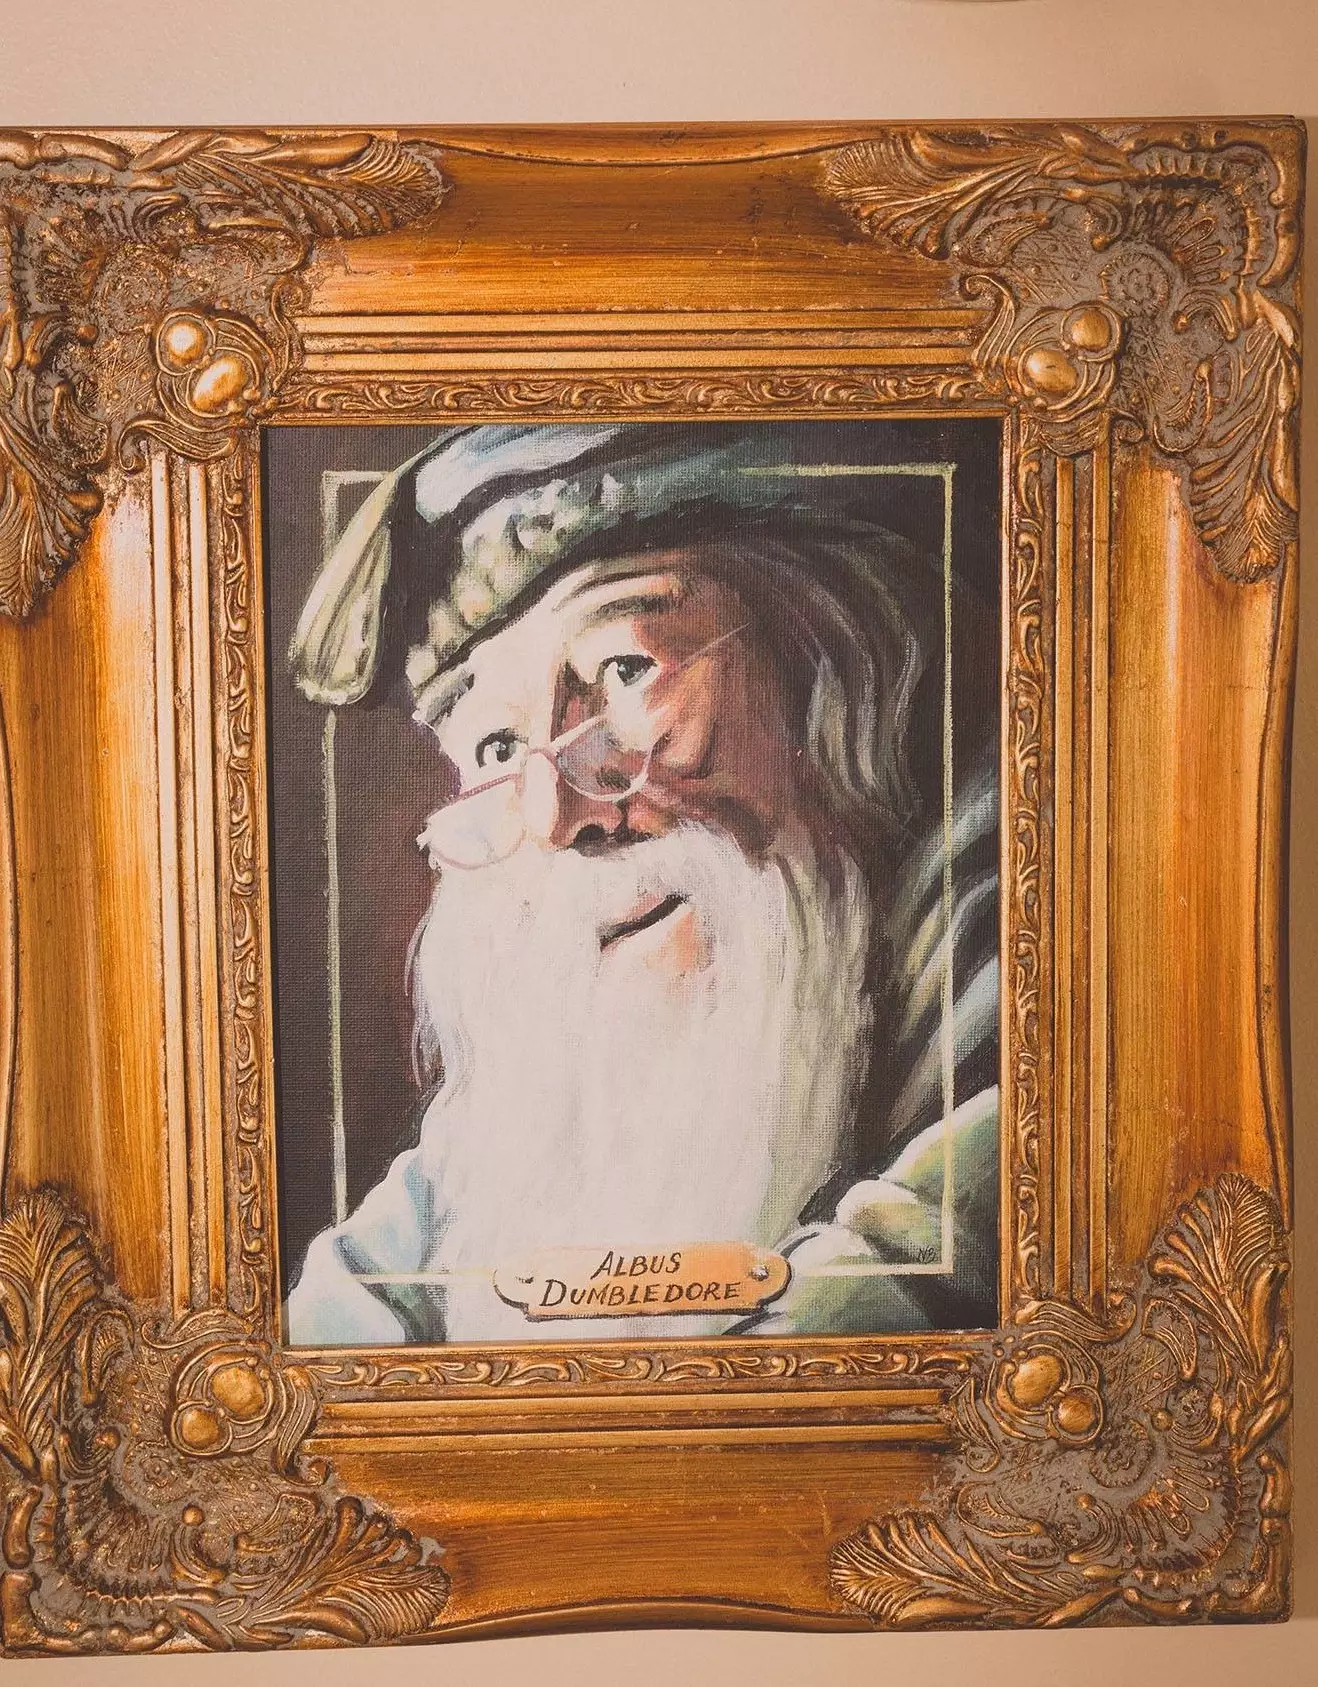 A picture of Dumbledore takes pride of place (